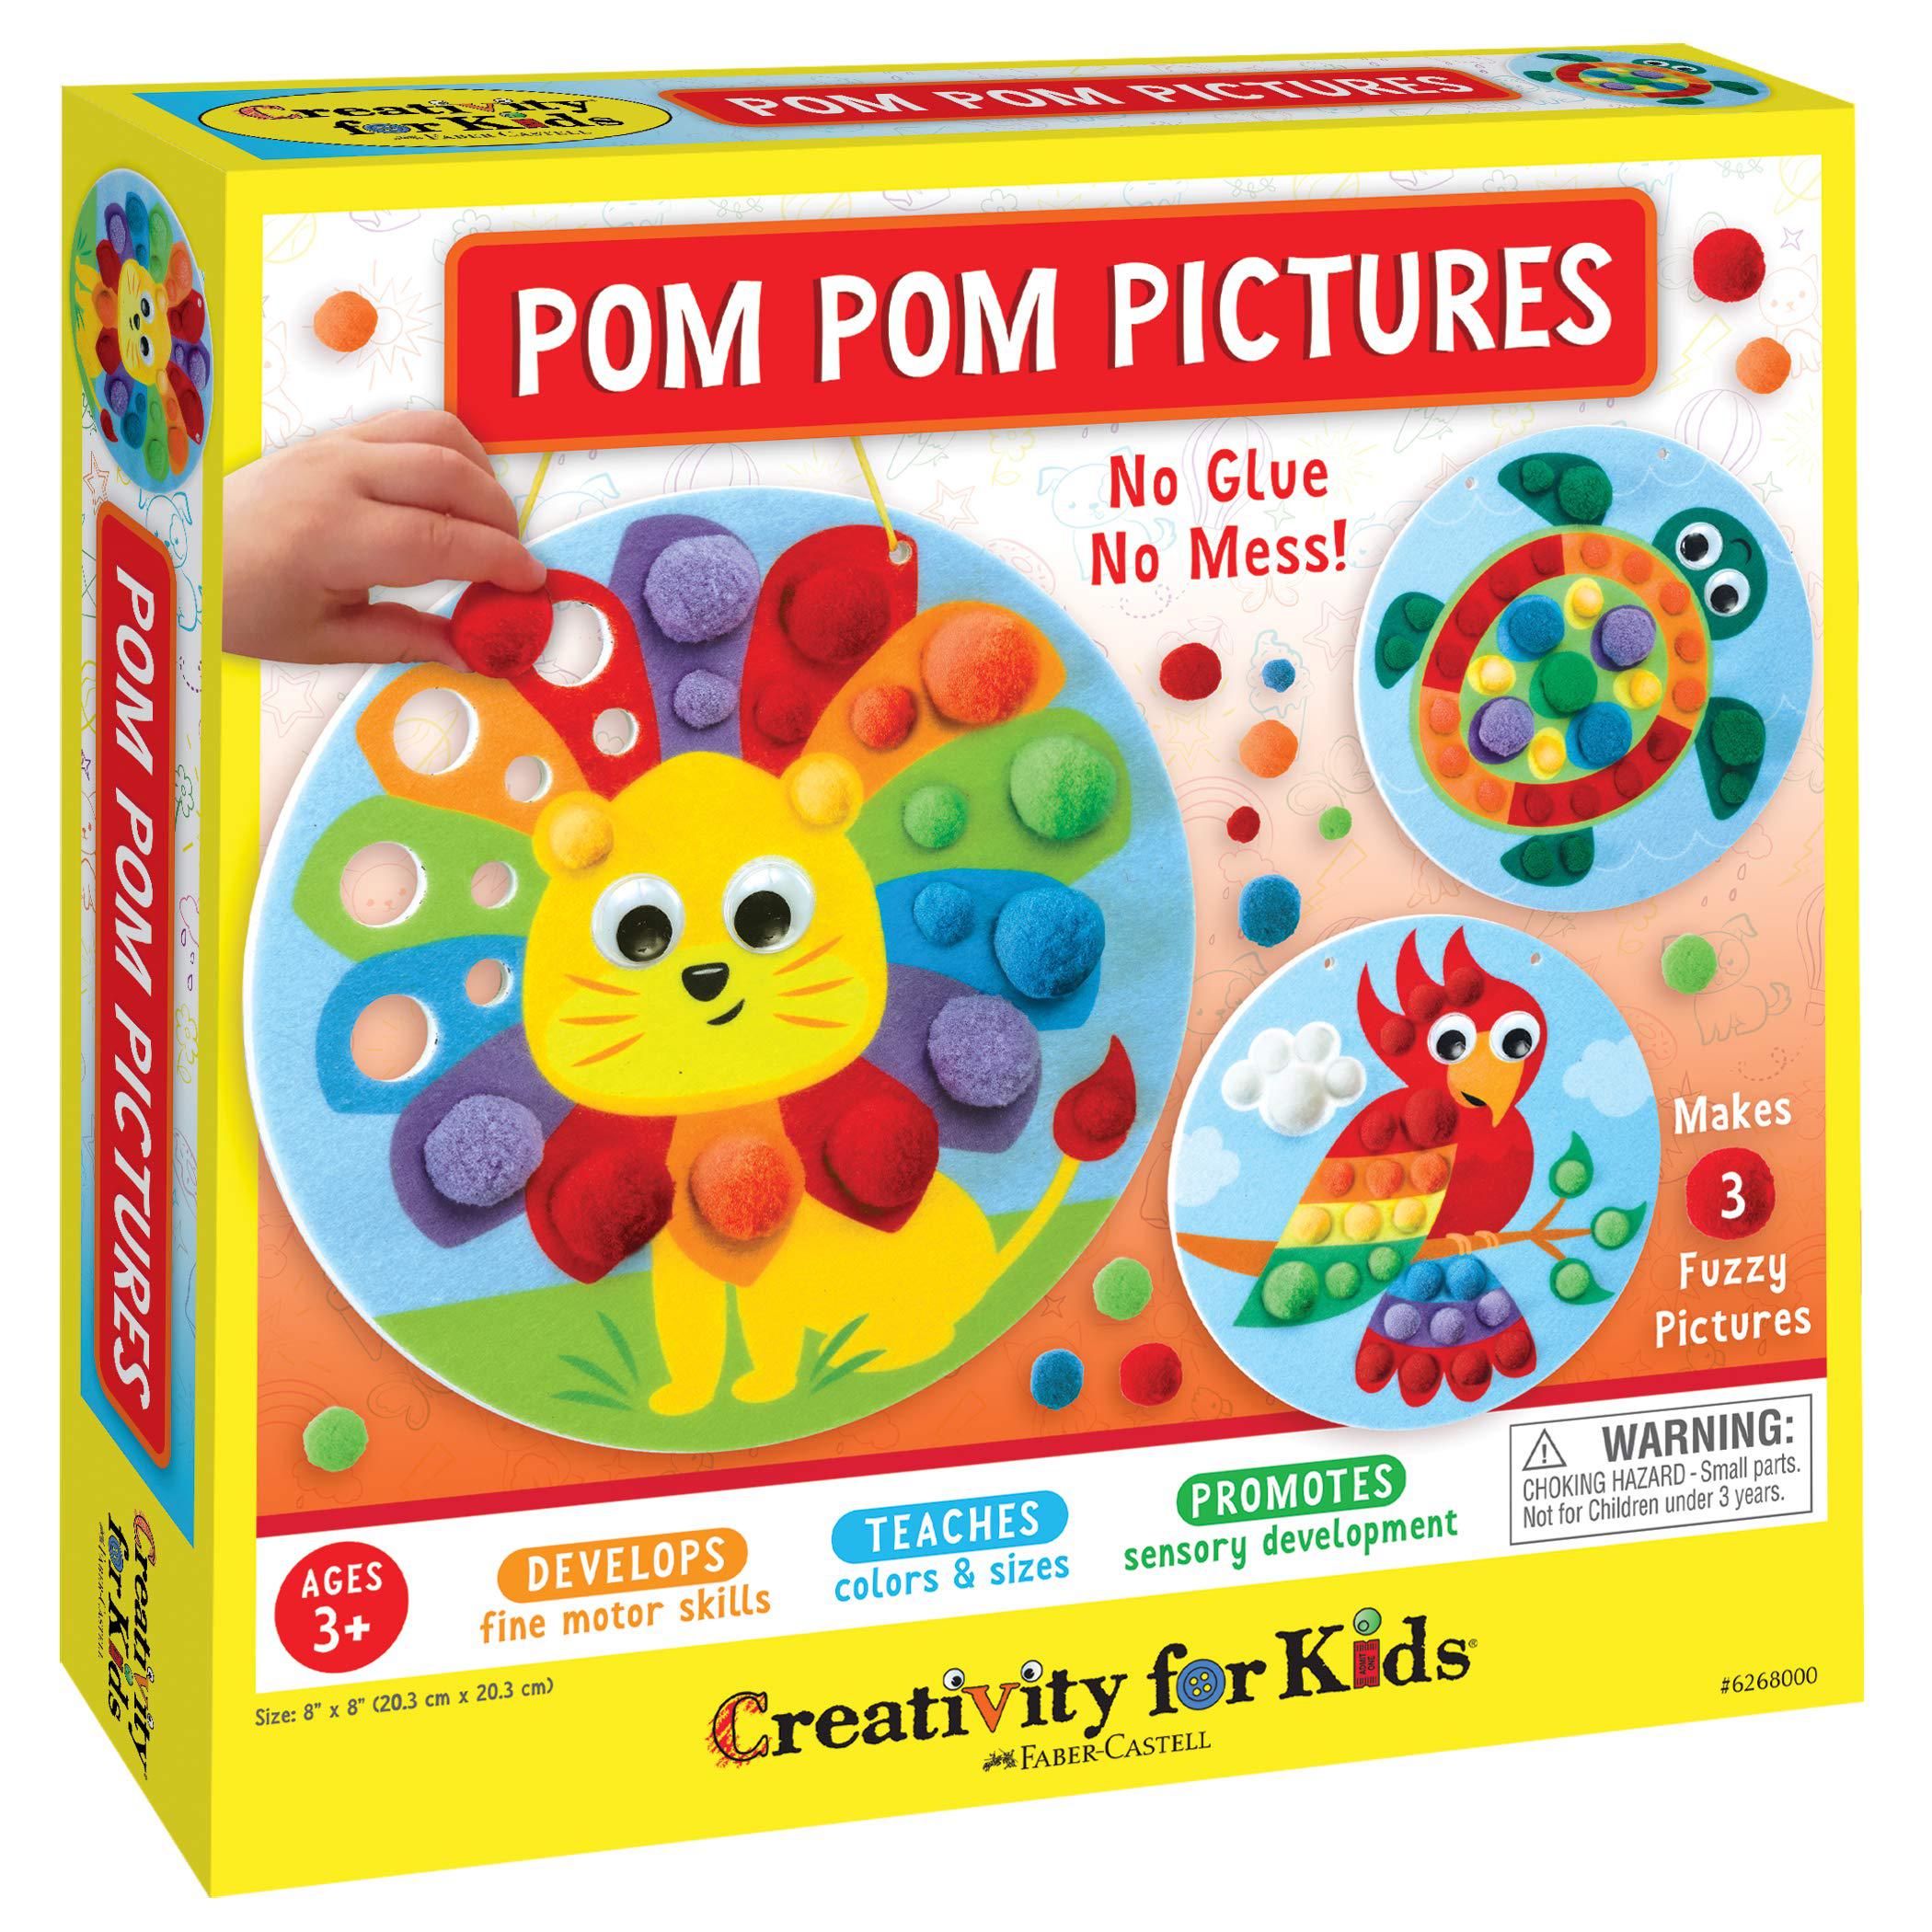 Faber-Castell Creativity for Kids Pom Pom Pictures: Animals - Preschool Learning Activities, Sensory Toys for Toddlers, Toddler Arts and Craft